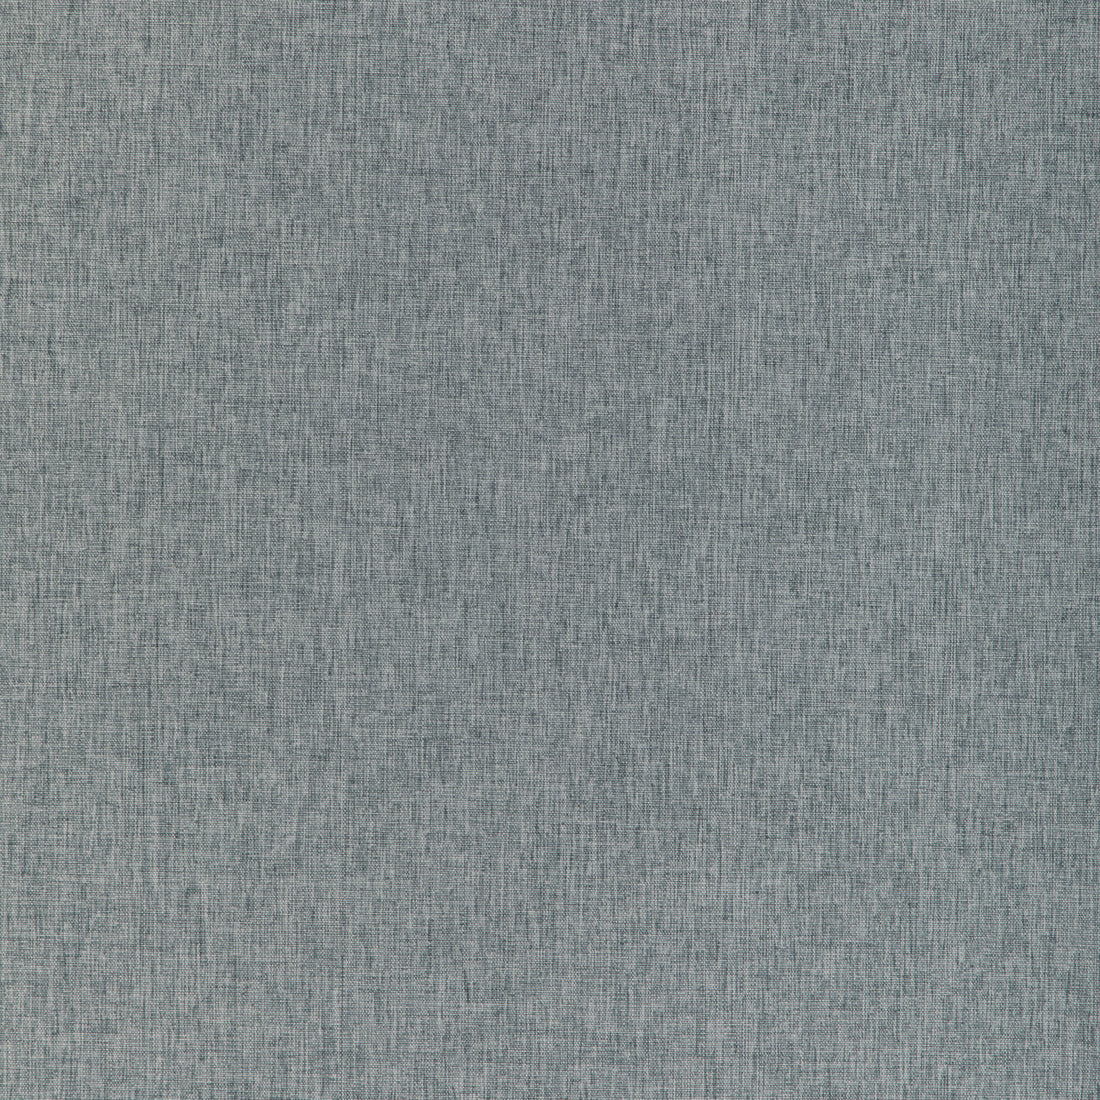 Kravet Contract fabric in 90001-1101 color - pattern 90001.1101.0 - by Kravet Contract in the Fr Window Blackout Drapery III collection